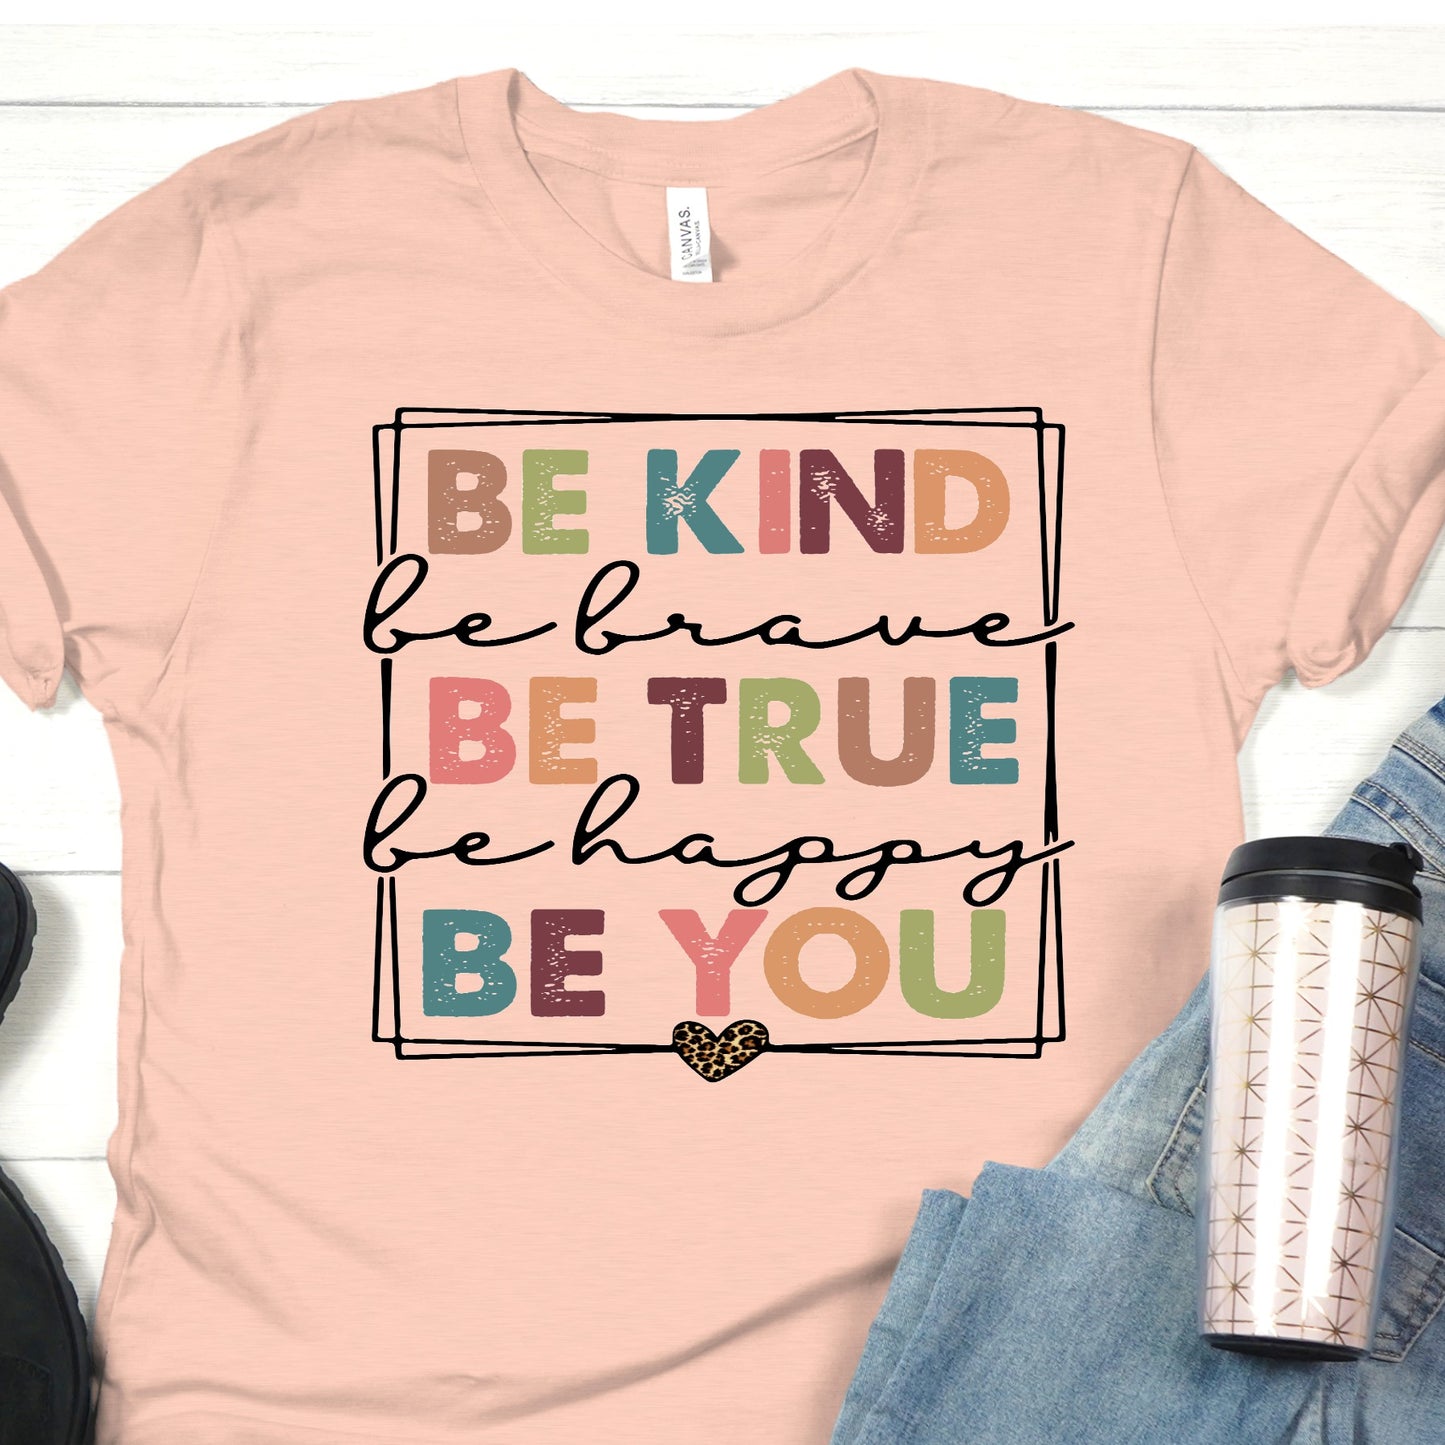 Be Kind, Be Brave... Be You